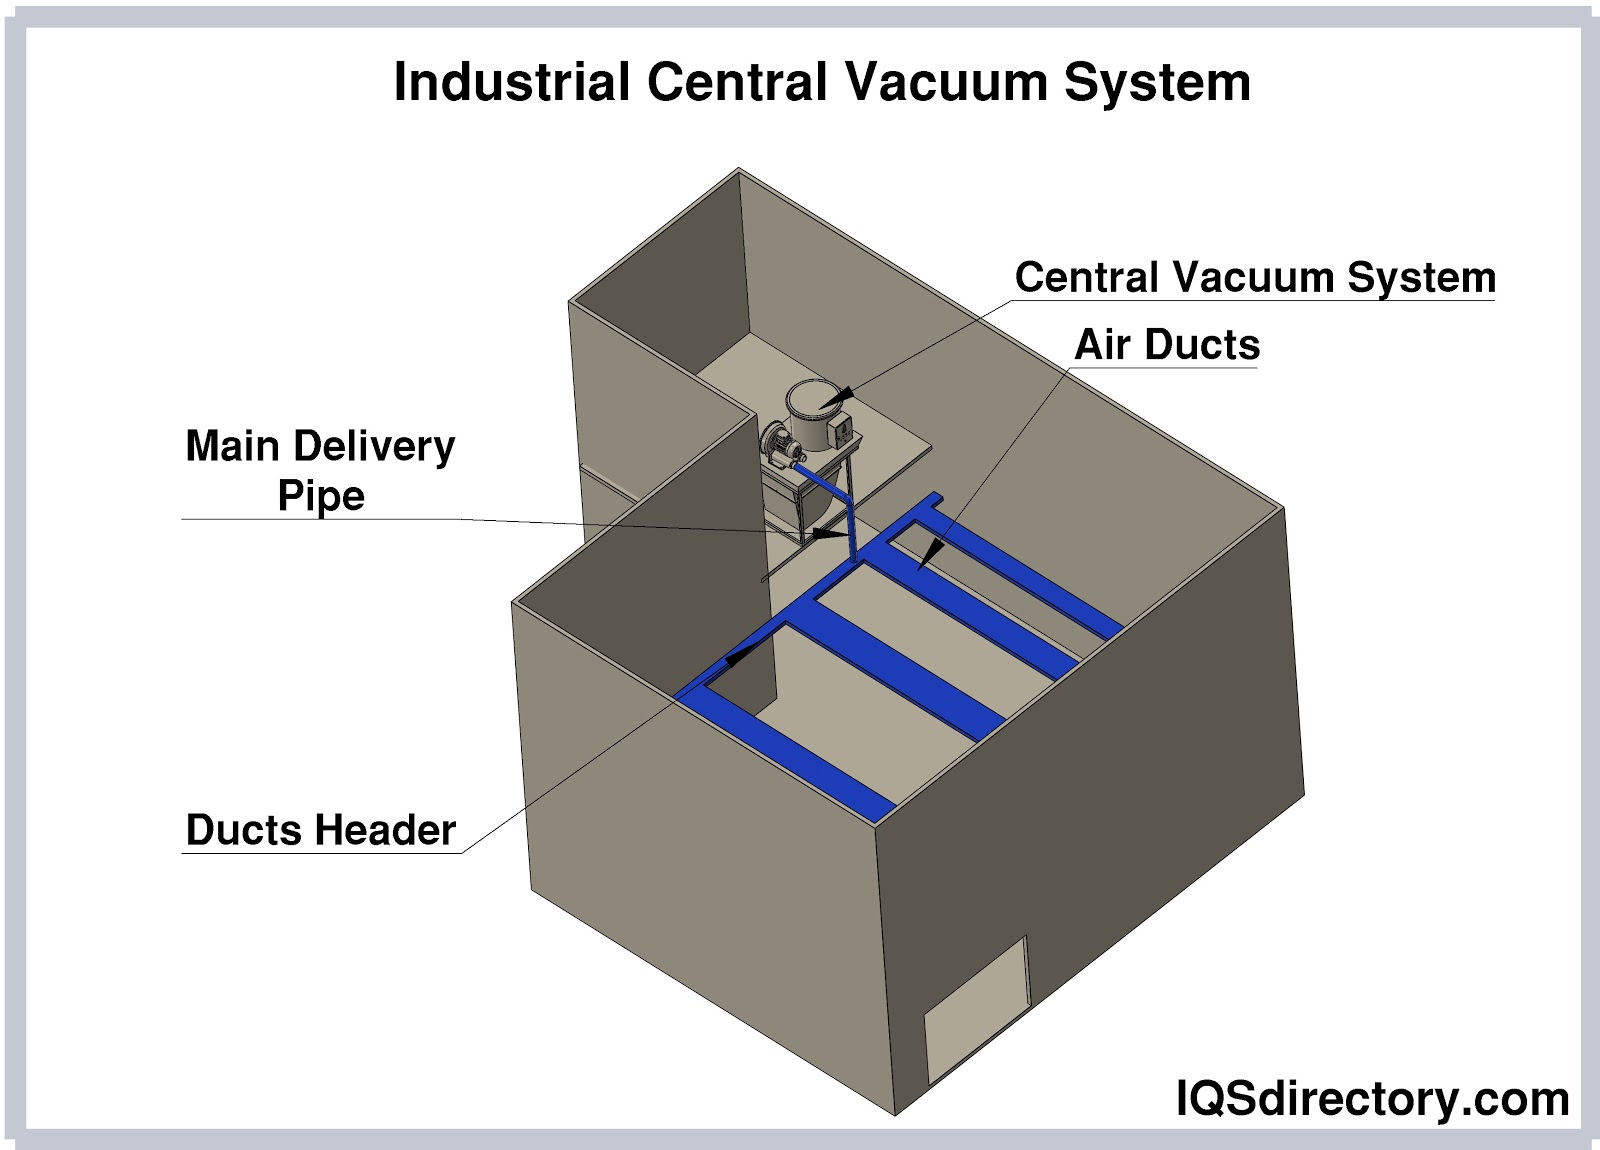 Industrial Central Vacuum System